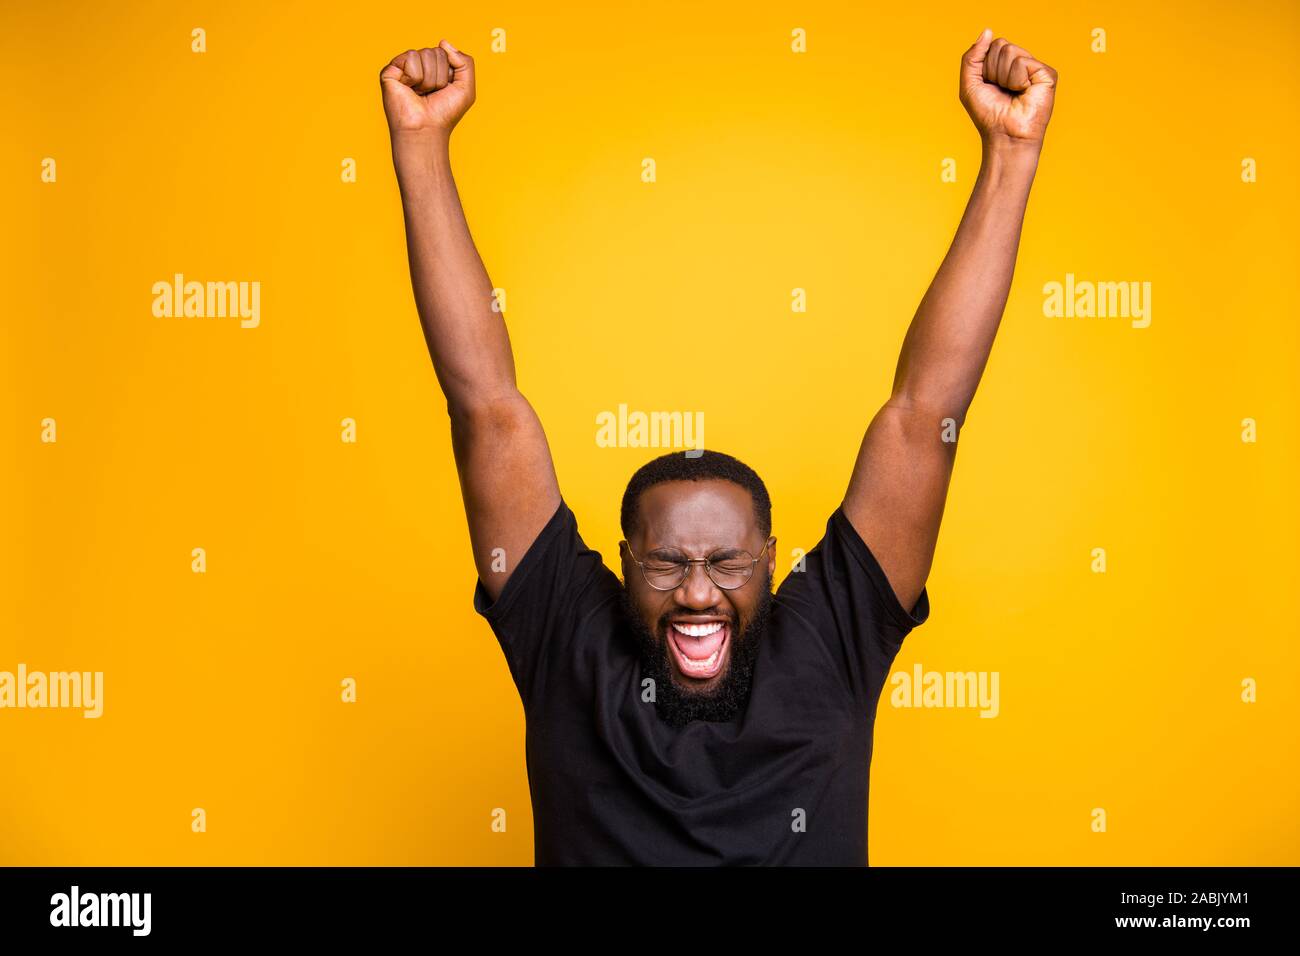 Photo of cheerful positive crazy excited man in spectacles black t-shirt  screaming shouting with rude face expression dreaming raising hands up  Stock Photo - Alamy